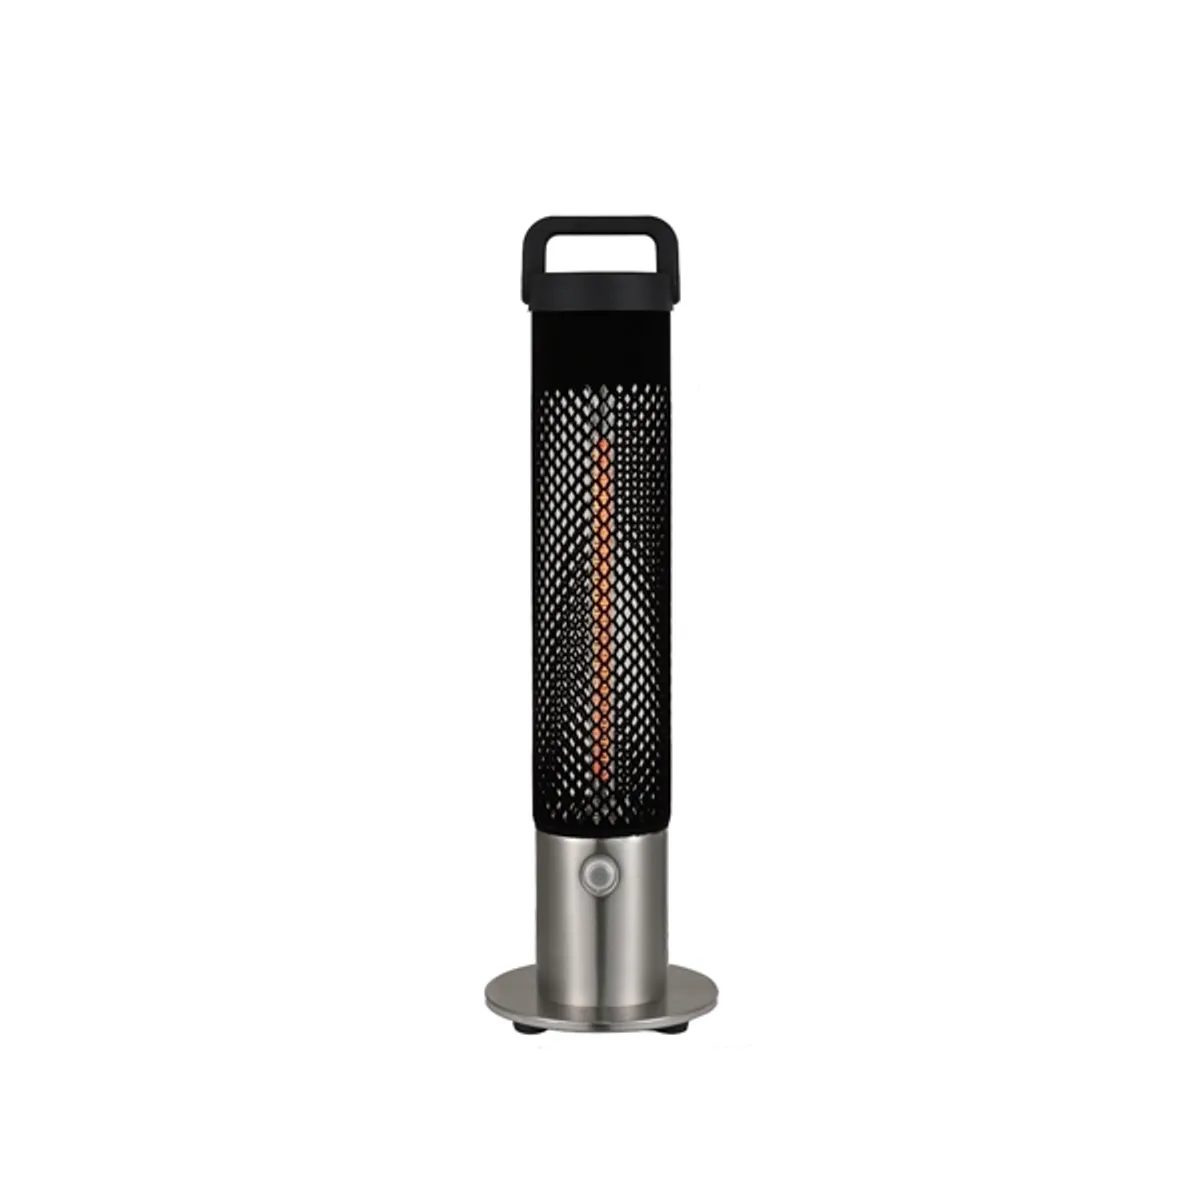 Surya Infrared floor standing heater Inside Out Contracts6